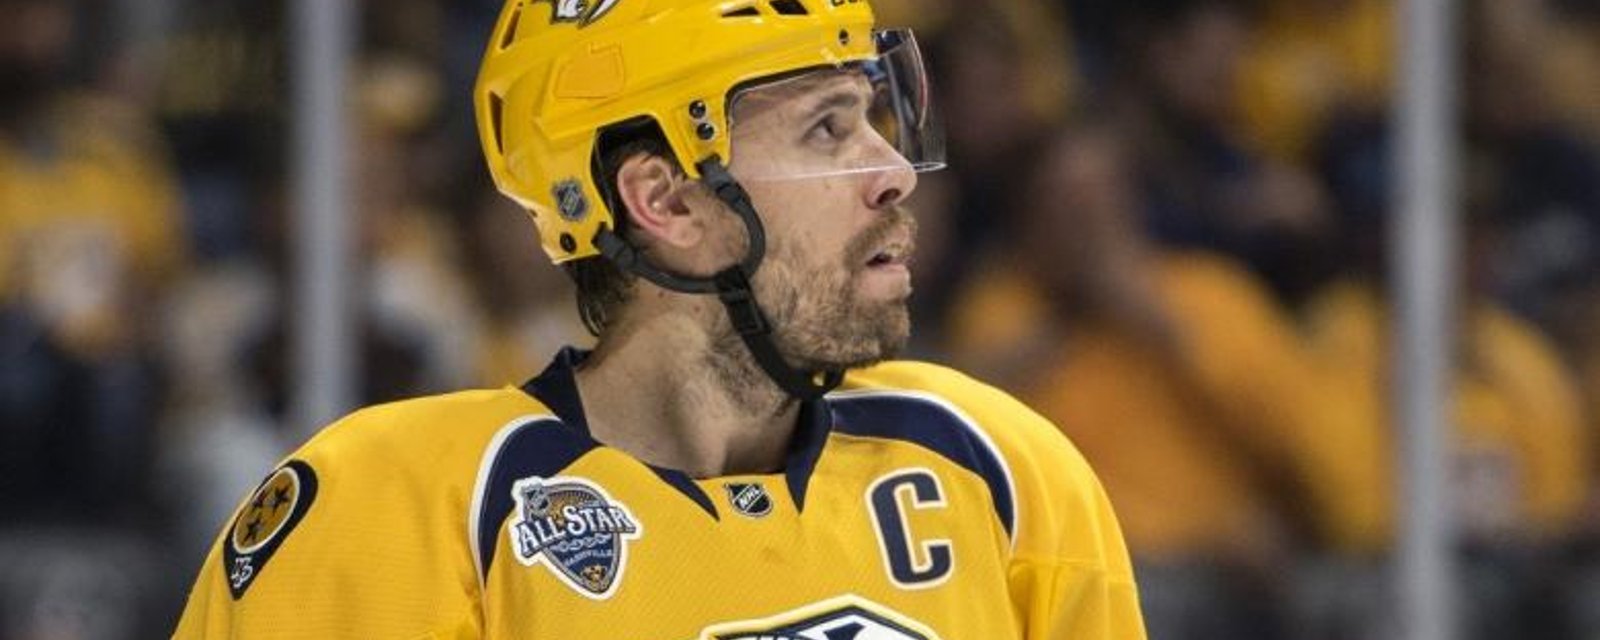 Shea Weber wins the hardest shot competition with an absolute rocket.